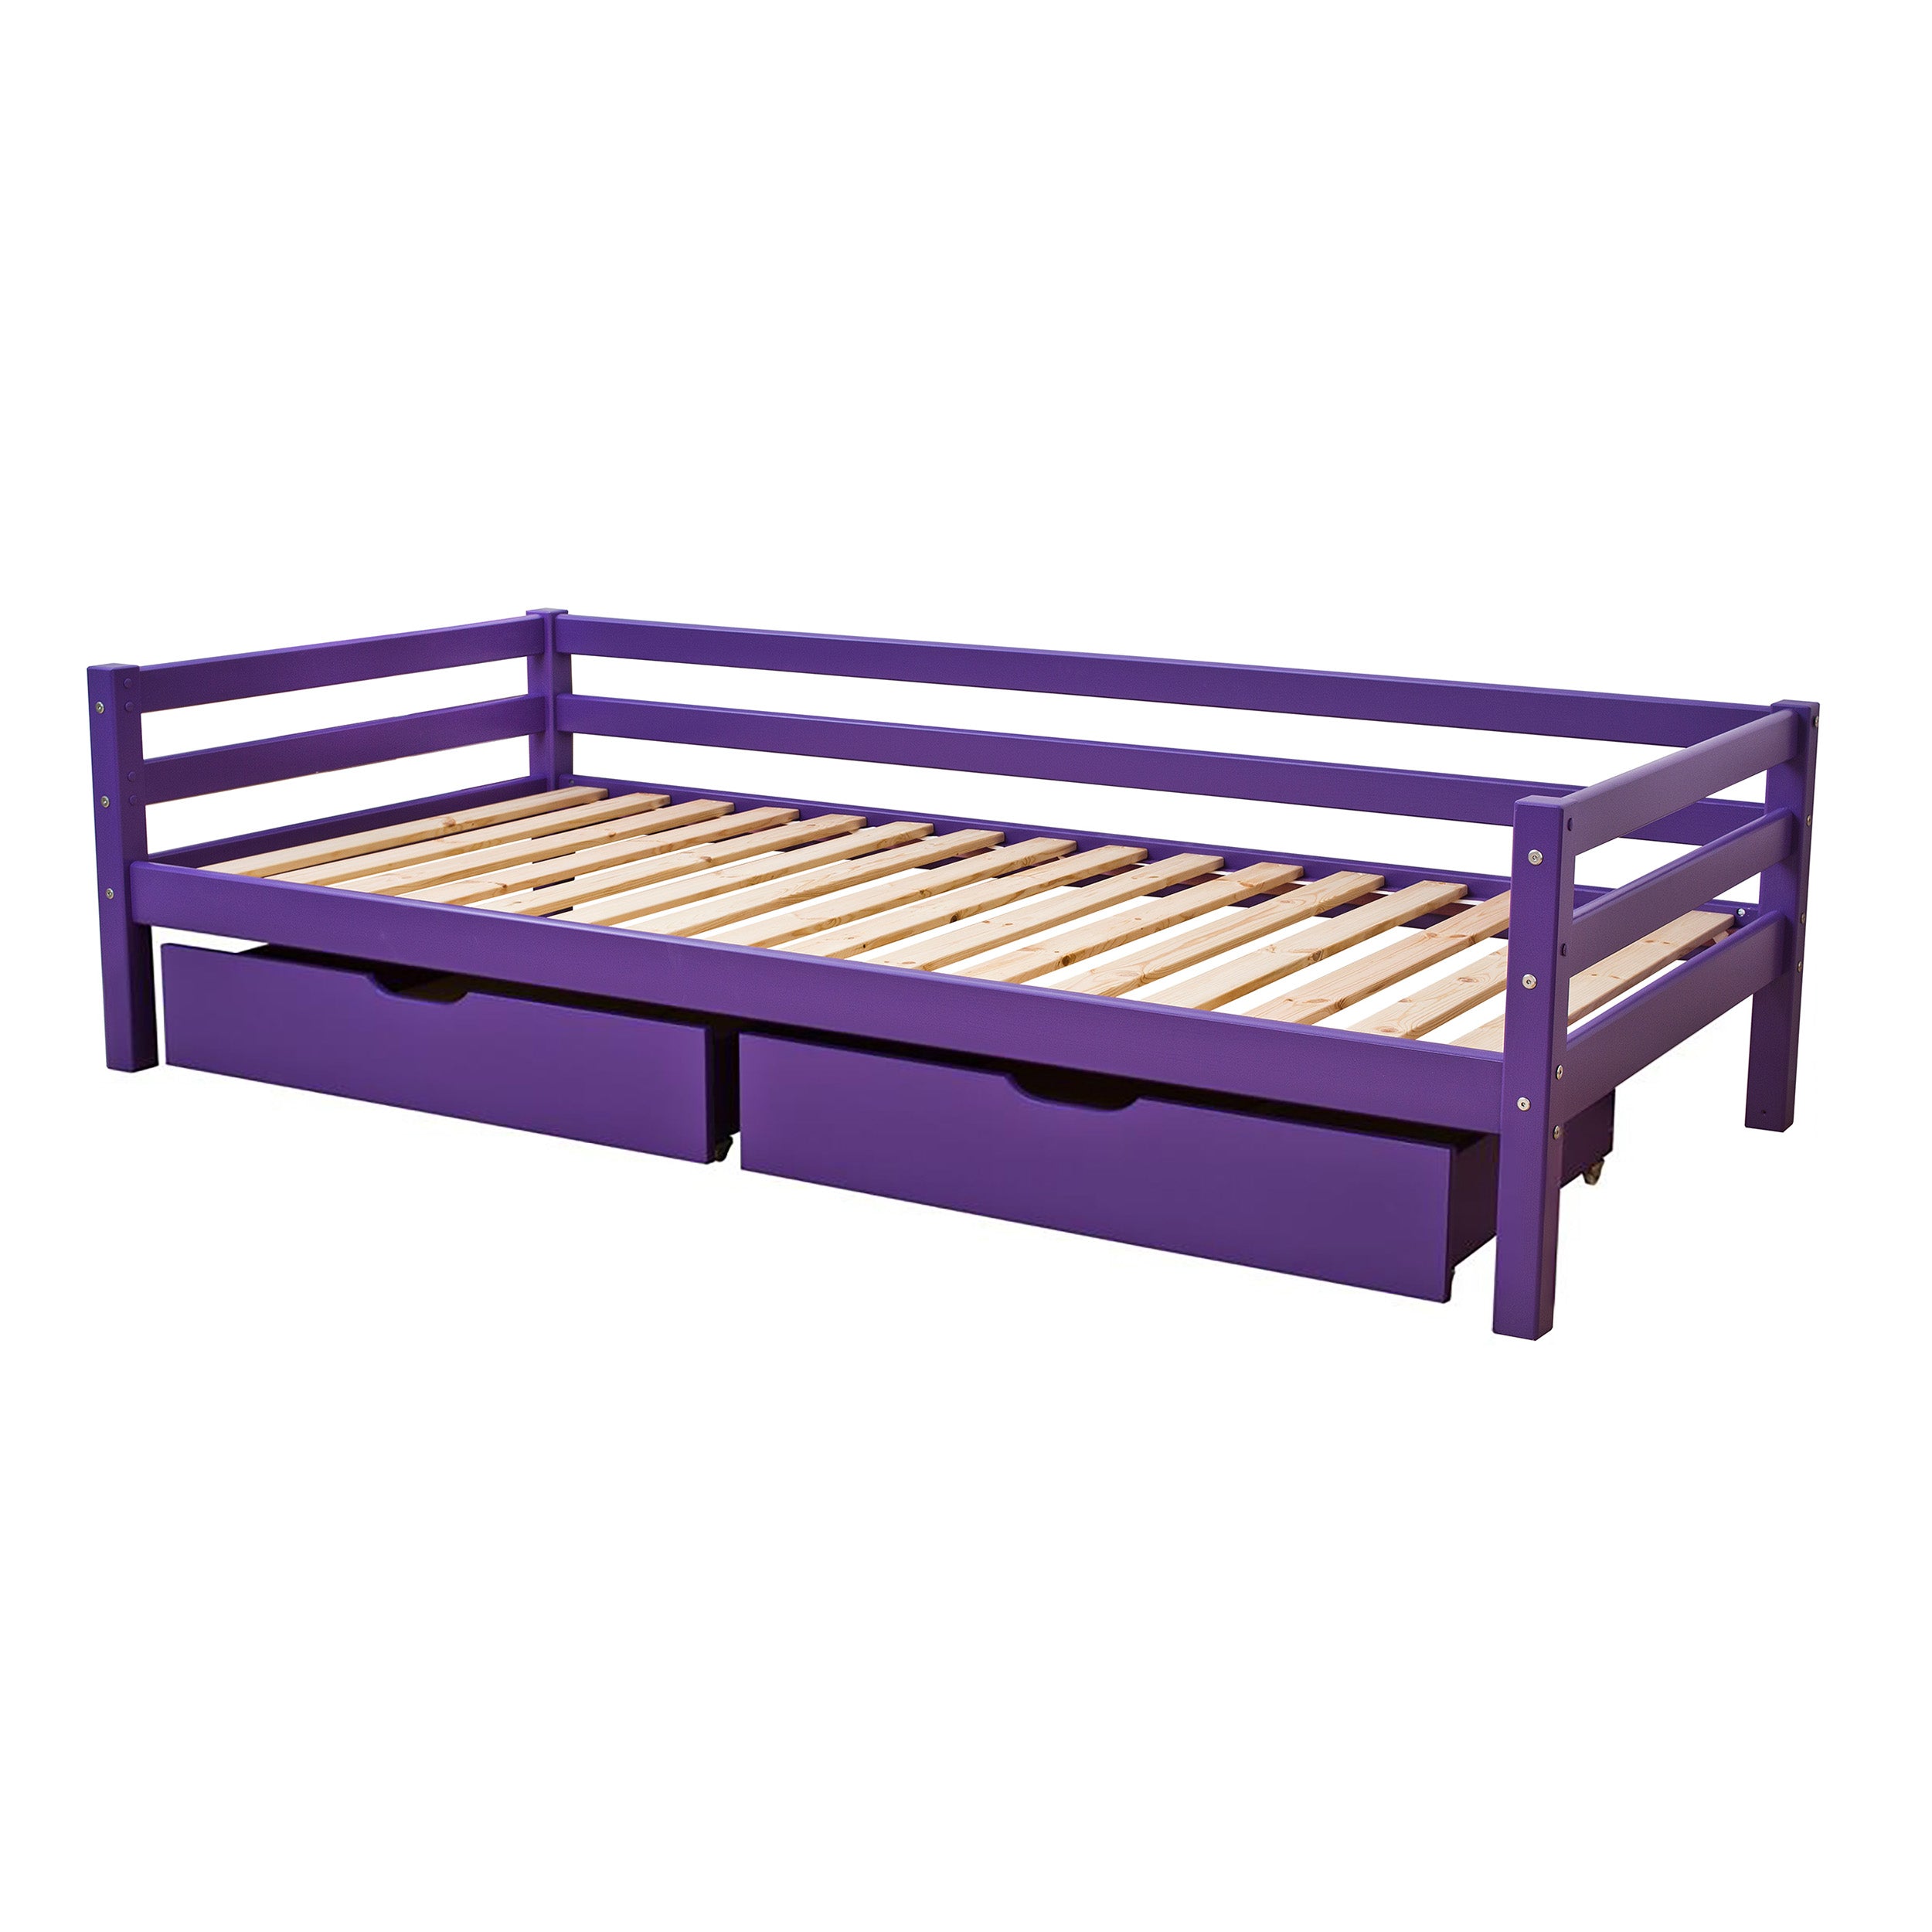 Outlet: ECO Dream juniorbed with drawers 70x160, Purple